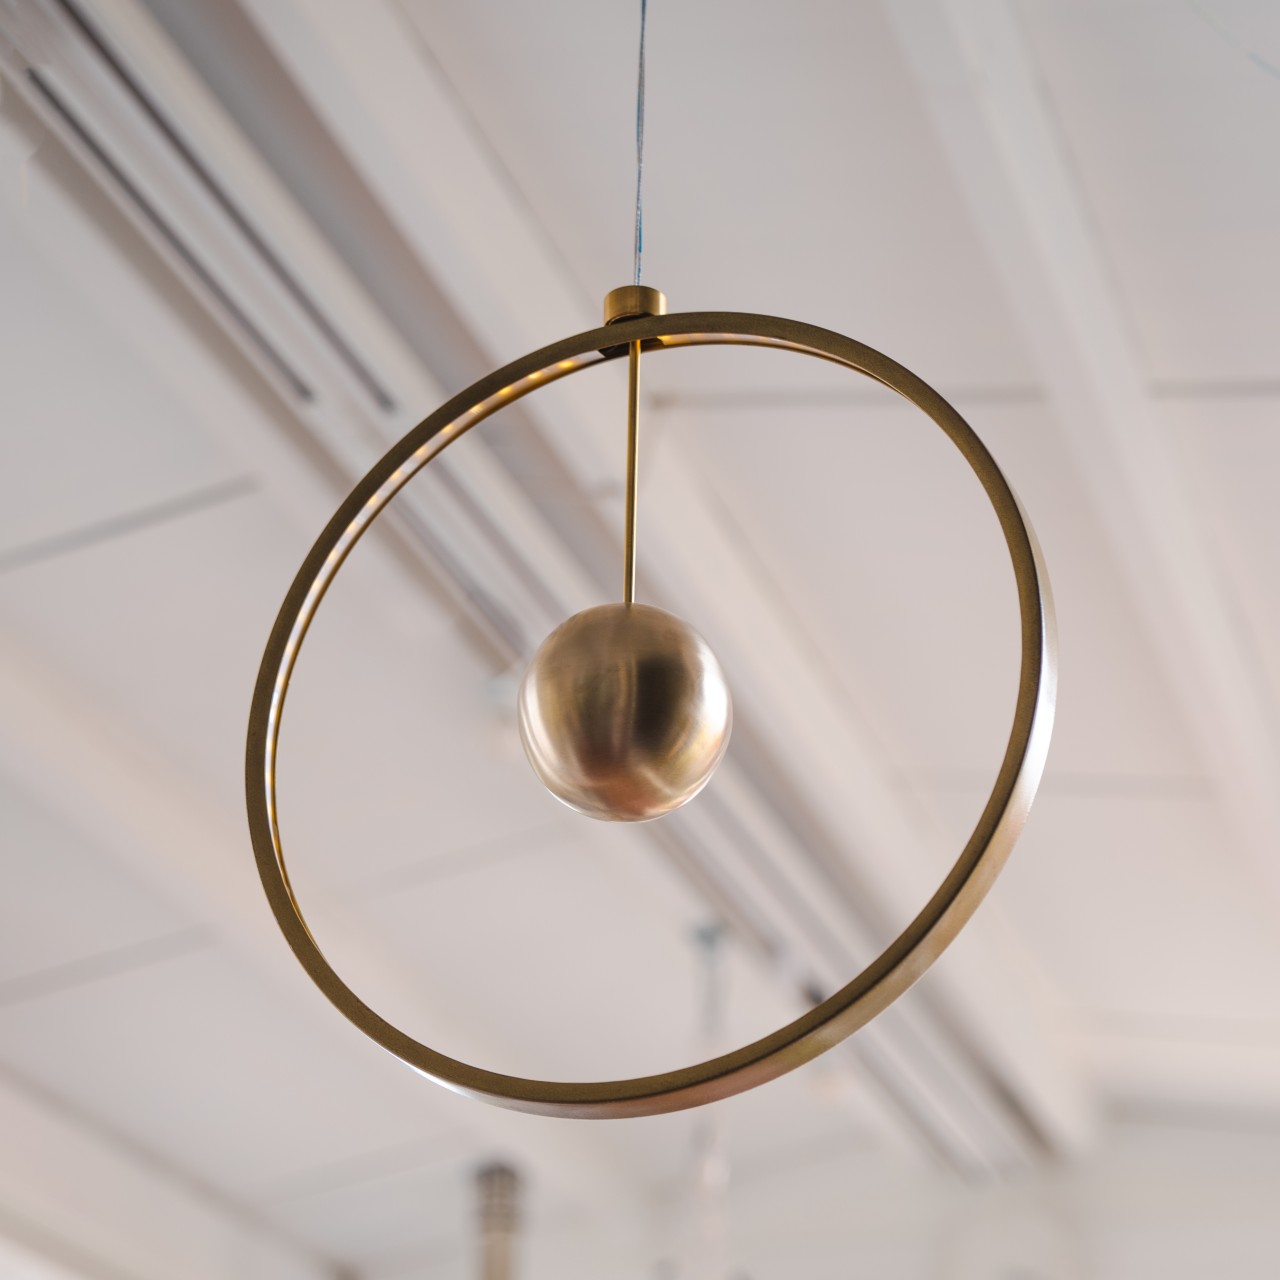 This pendant lamp is like a heavenly body that casts a calming glow in your room